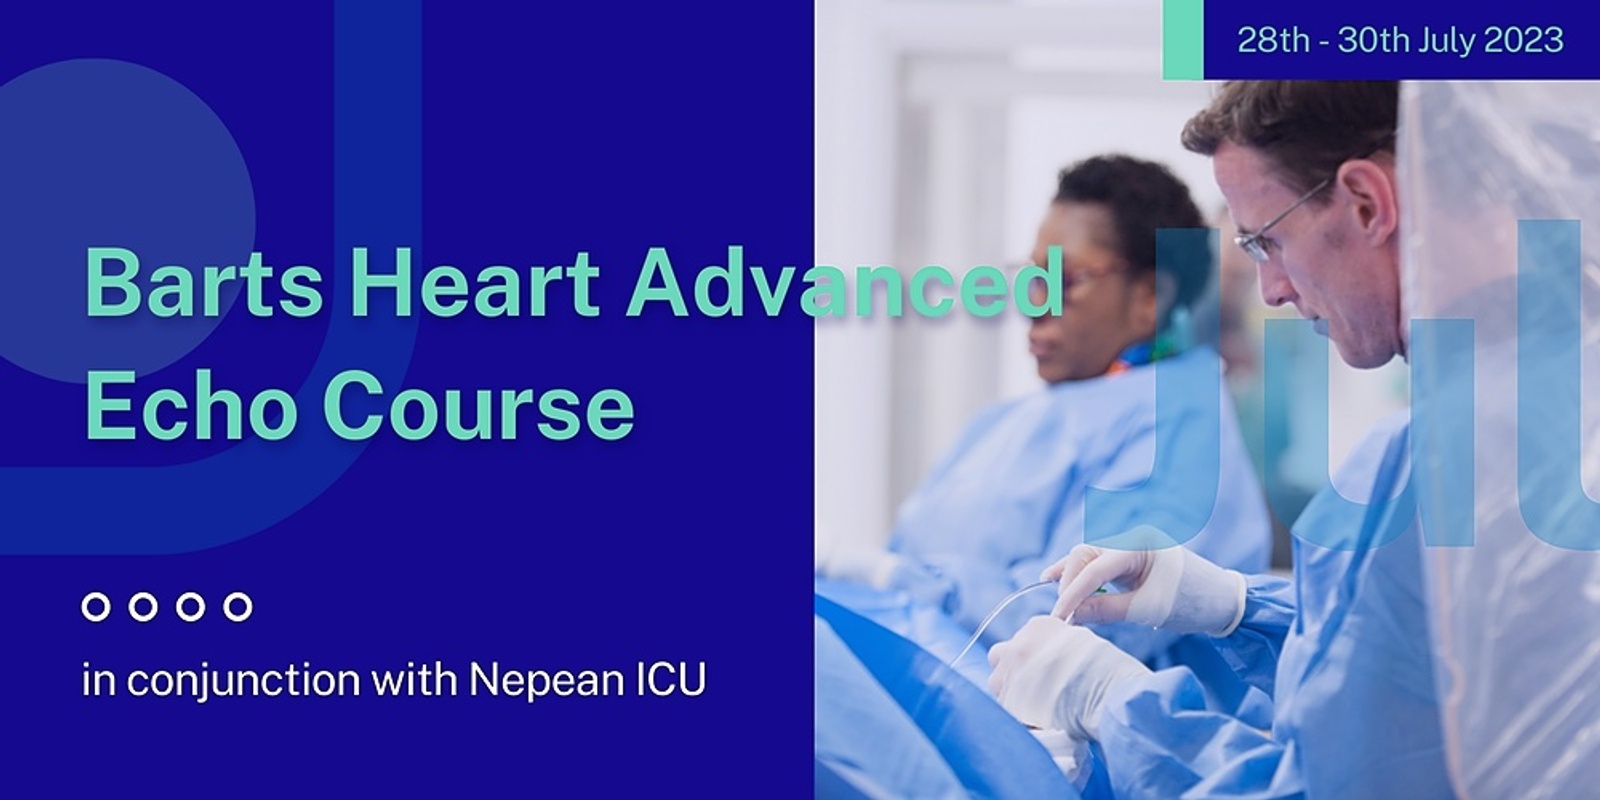 Barts Heart Advanced Critical Care Echocardiography Course (Barts ACCE)